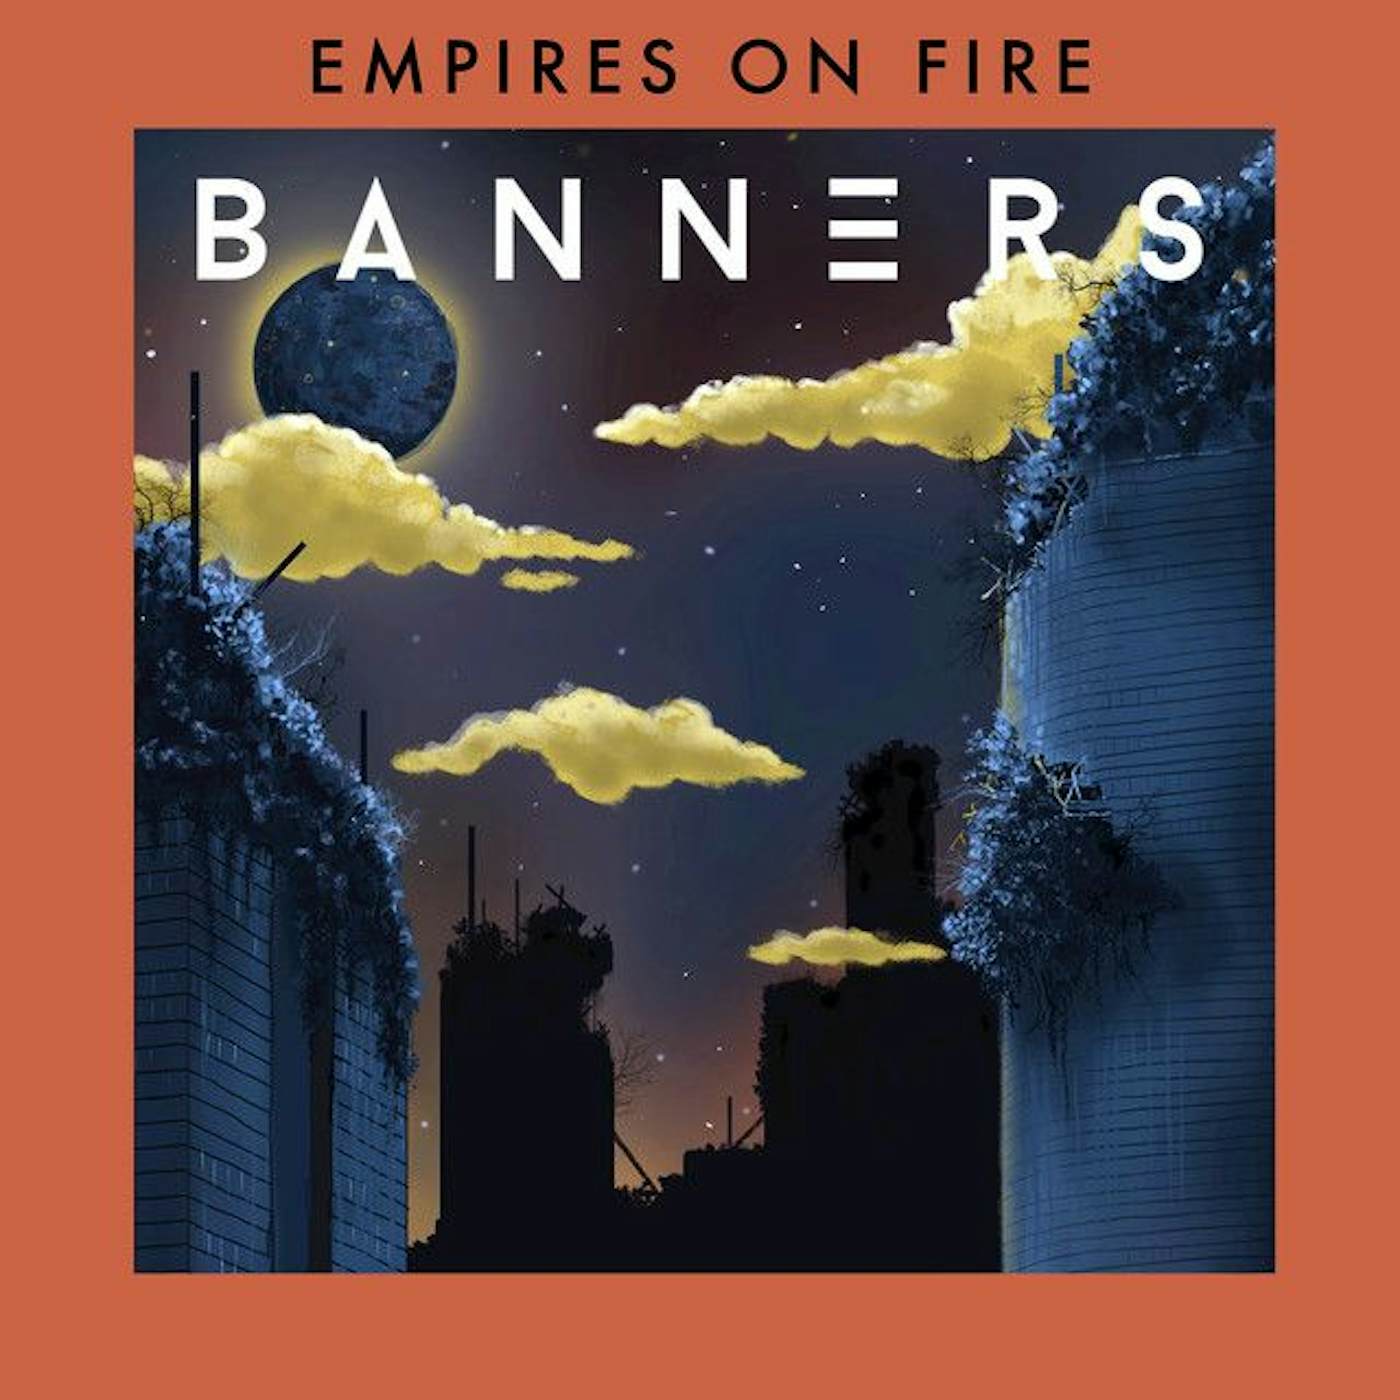 BANNERS / EMPIRES ON FIRE Vinyl Record